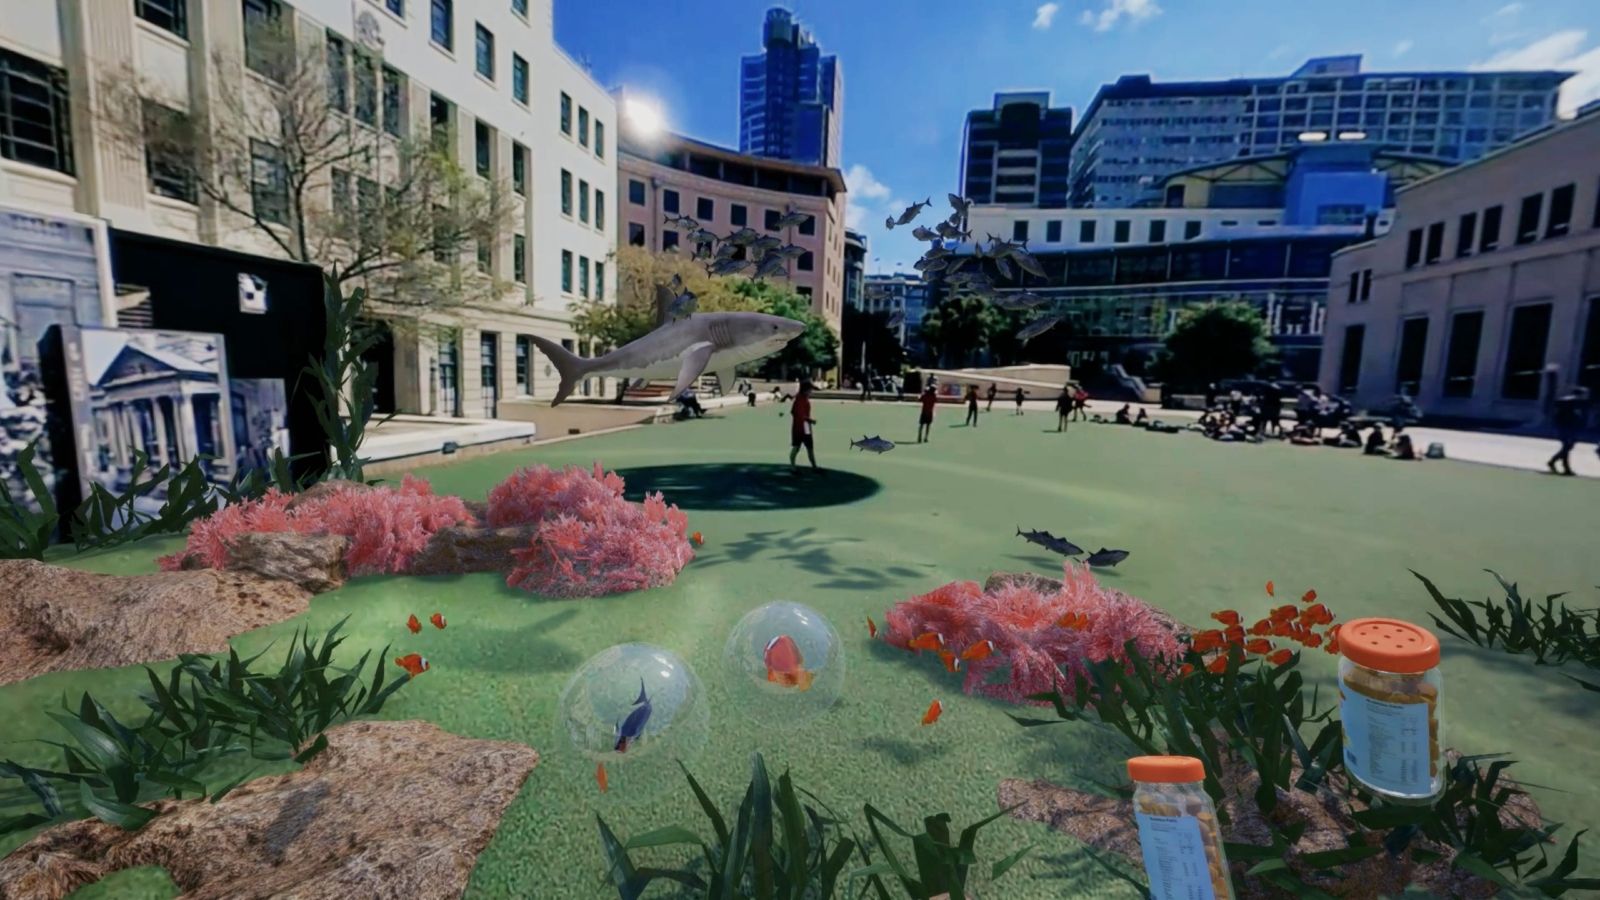 CG augmented image of Wellington civic centre with overlaid images of fish, bubbles, and jars